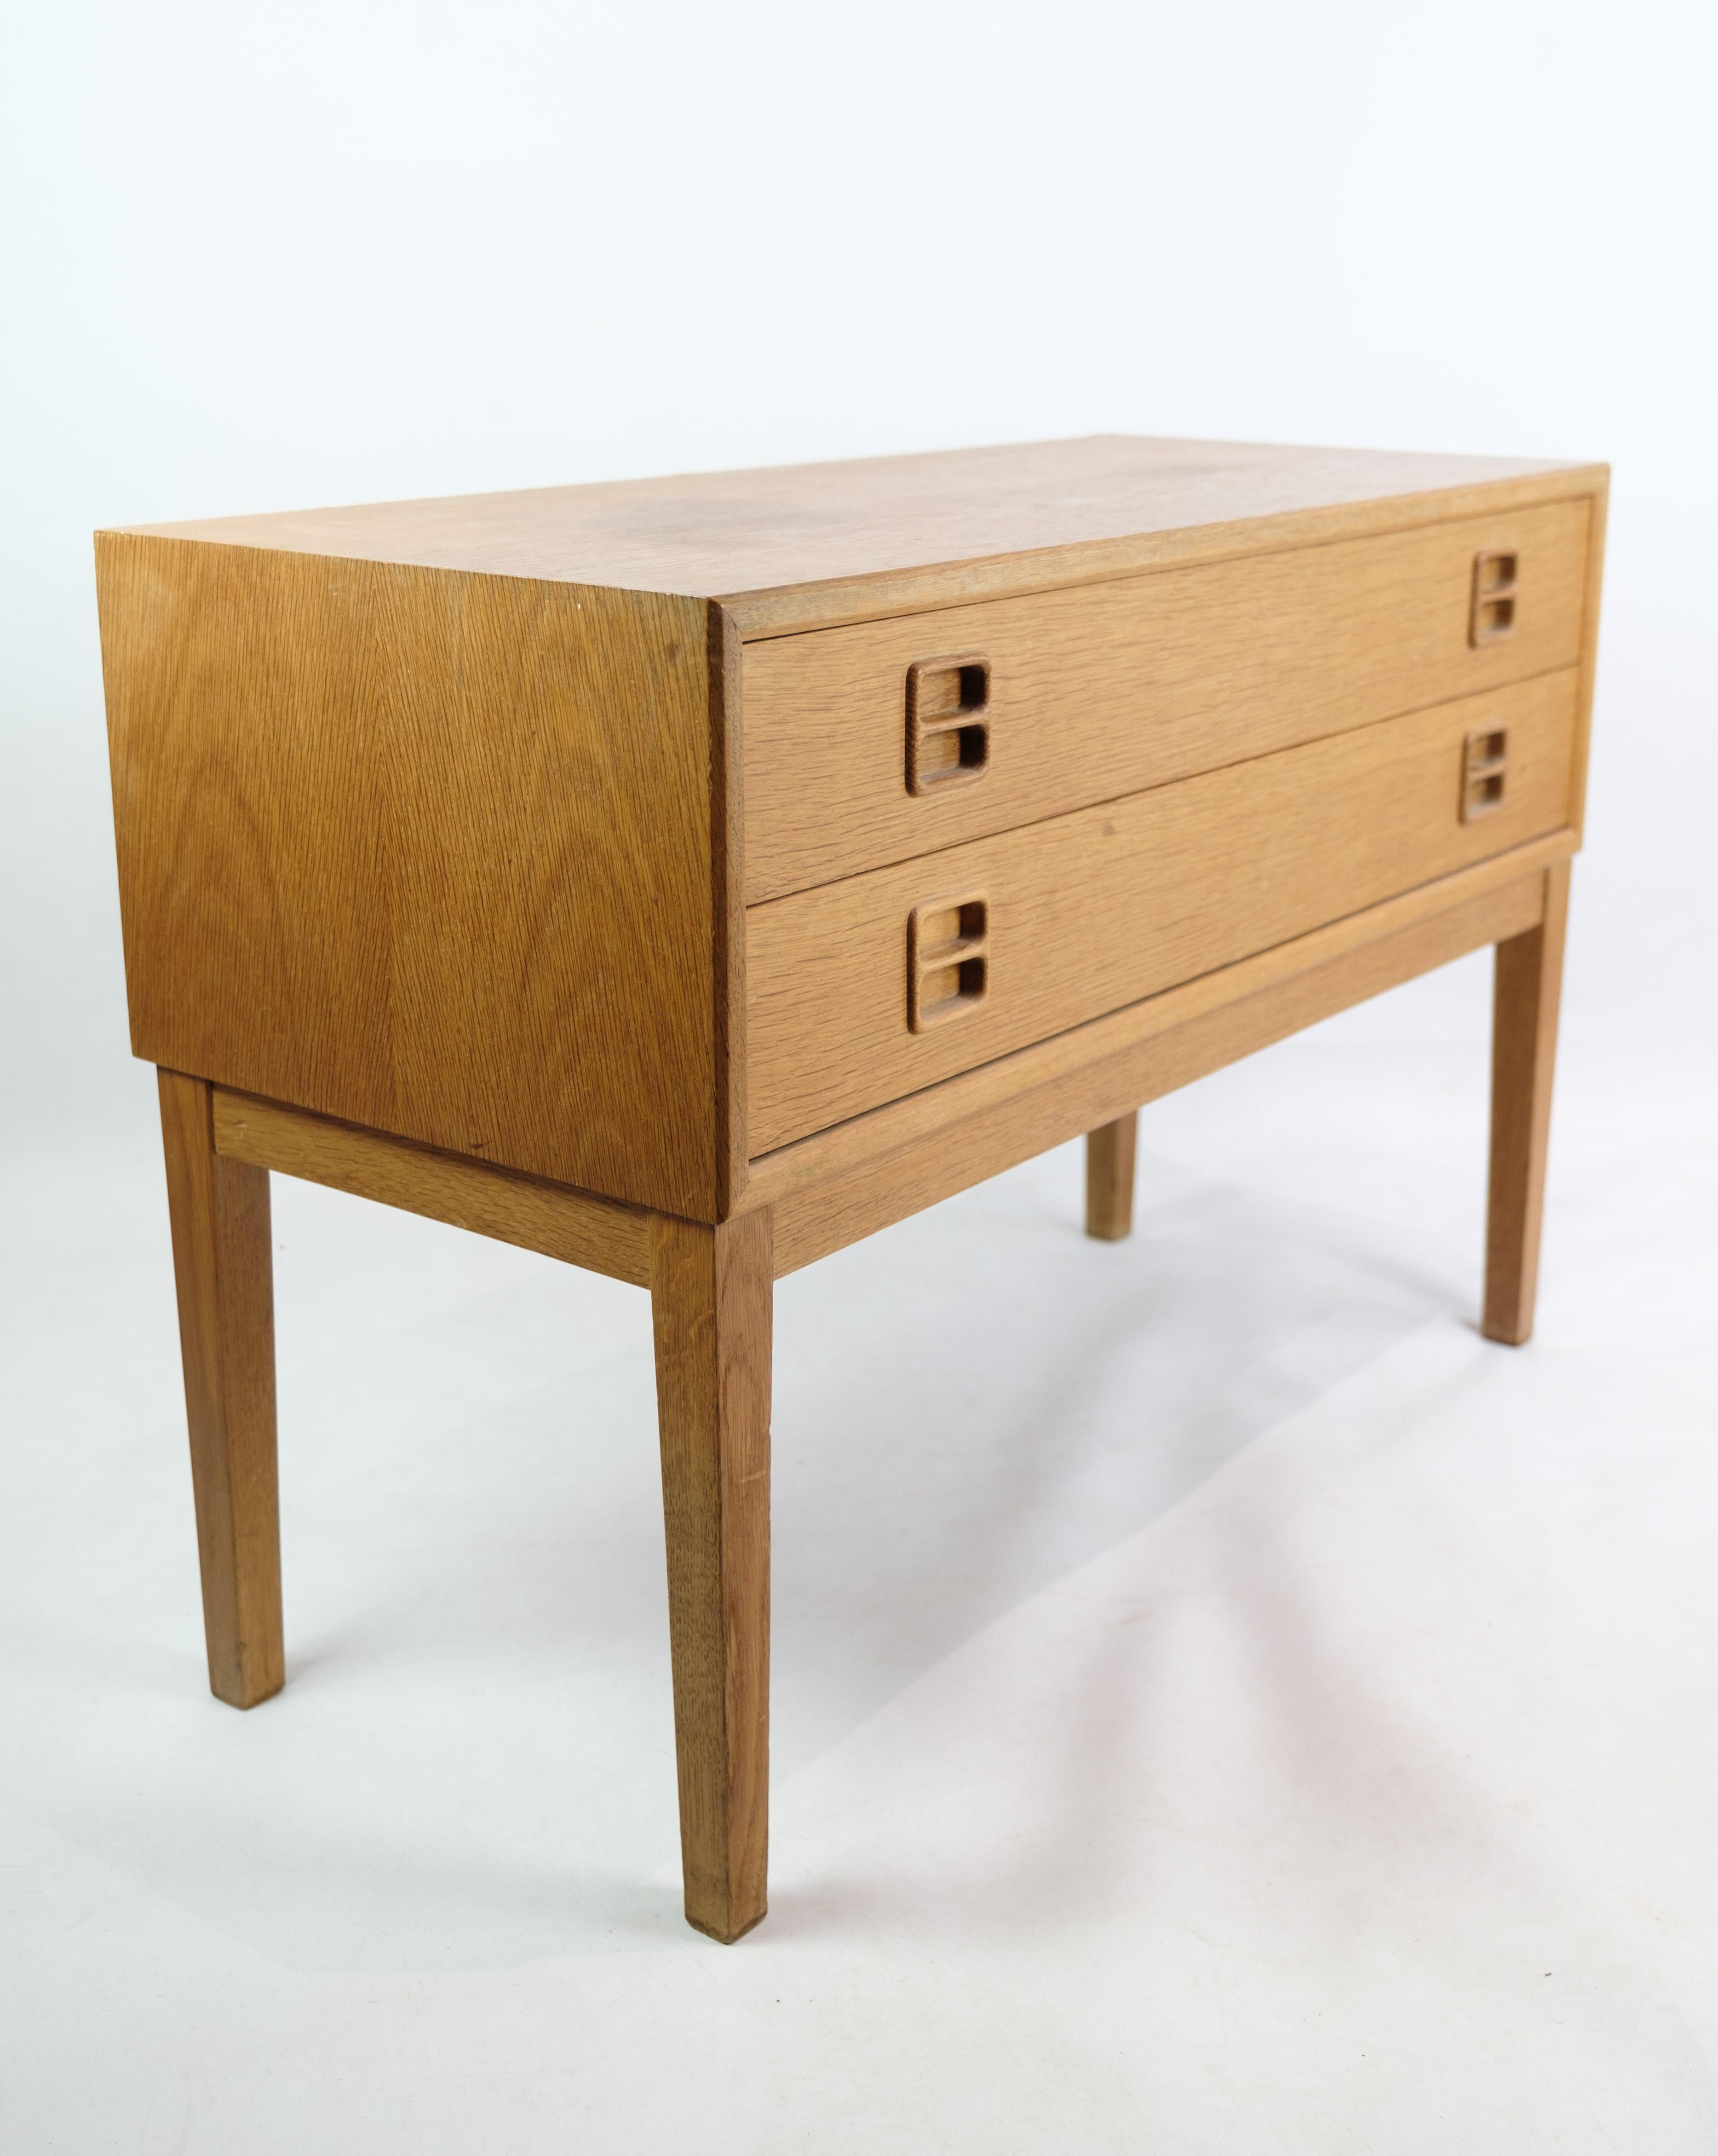 Oblong chest of drawers in oak with 2 drawers and wooden handles of Danish furniture design from around the 1960s. The furniture appears in very fine used condition and is well suited to be both entrance furniture, as well as storage